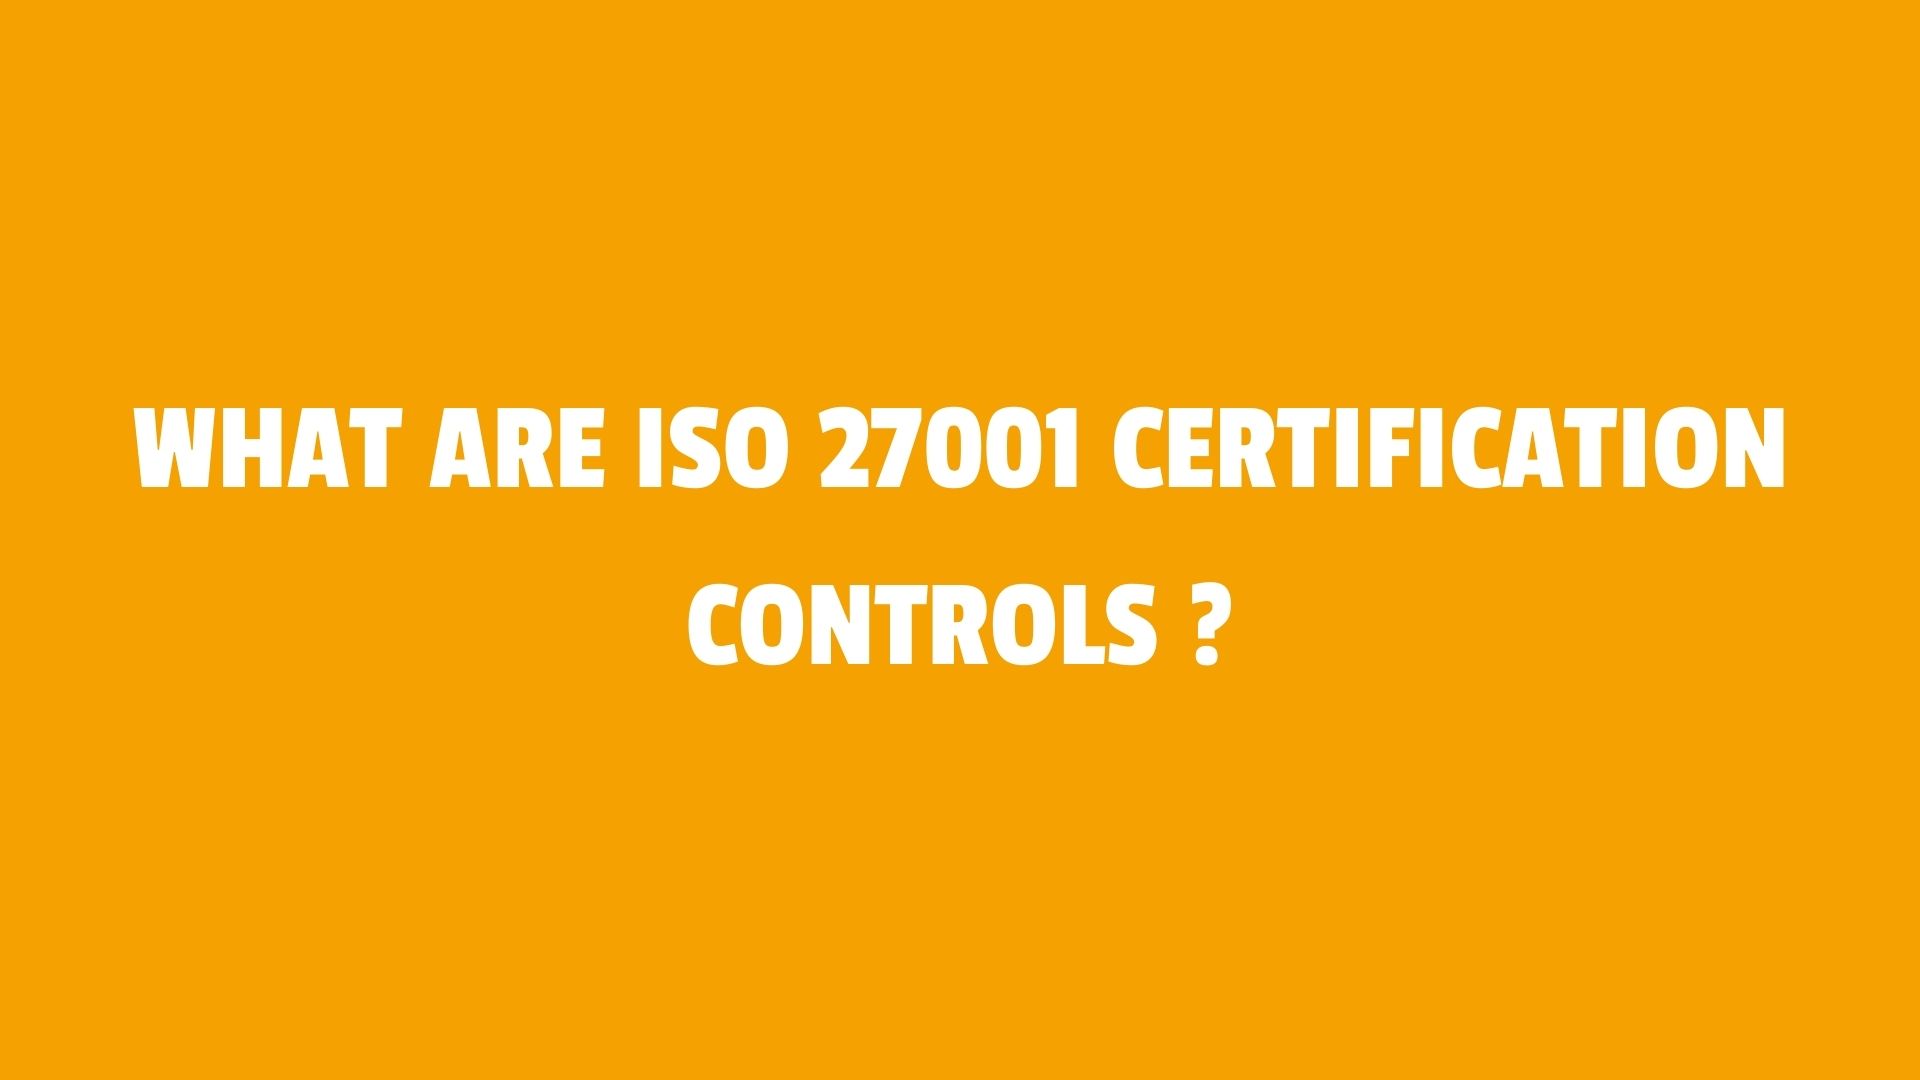 What are ISO 27001 Certification Controls ?